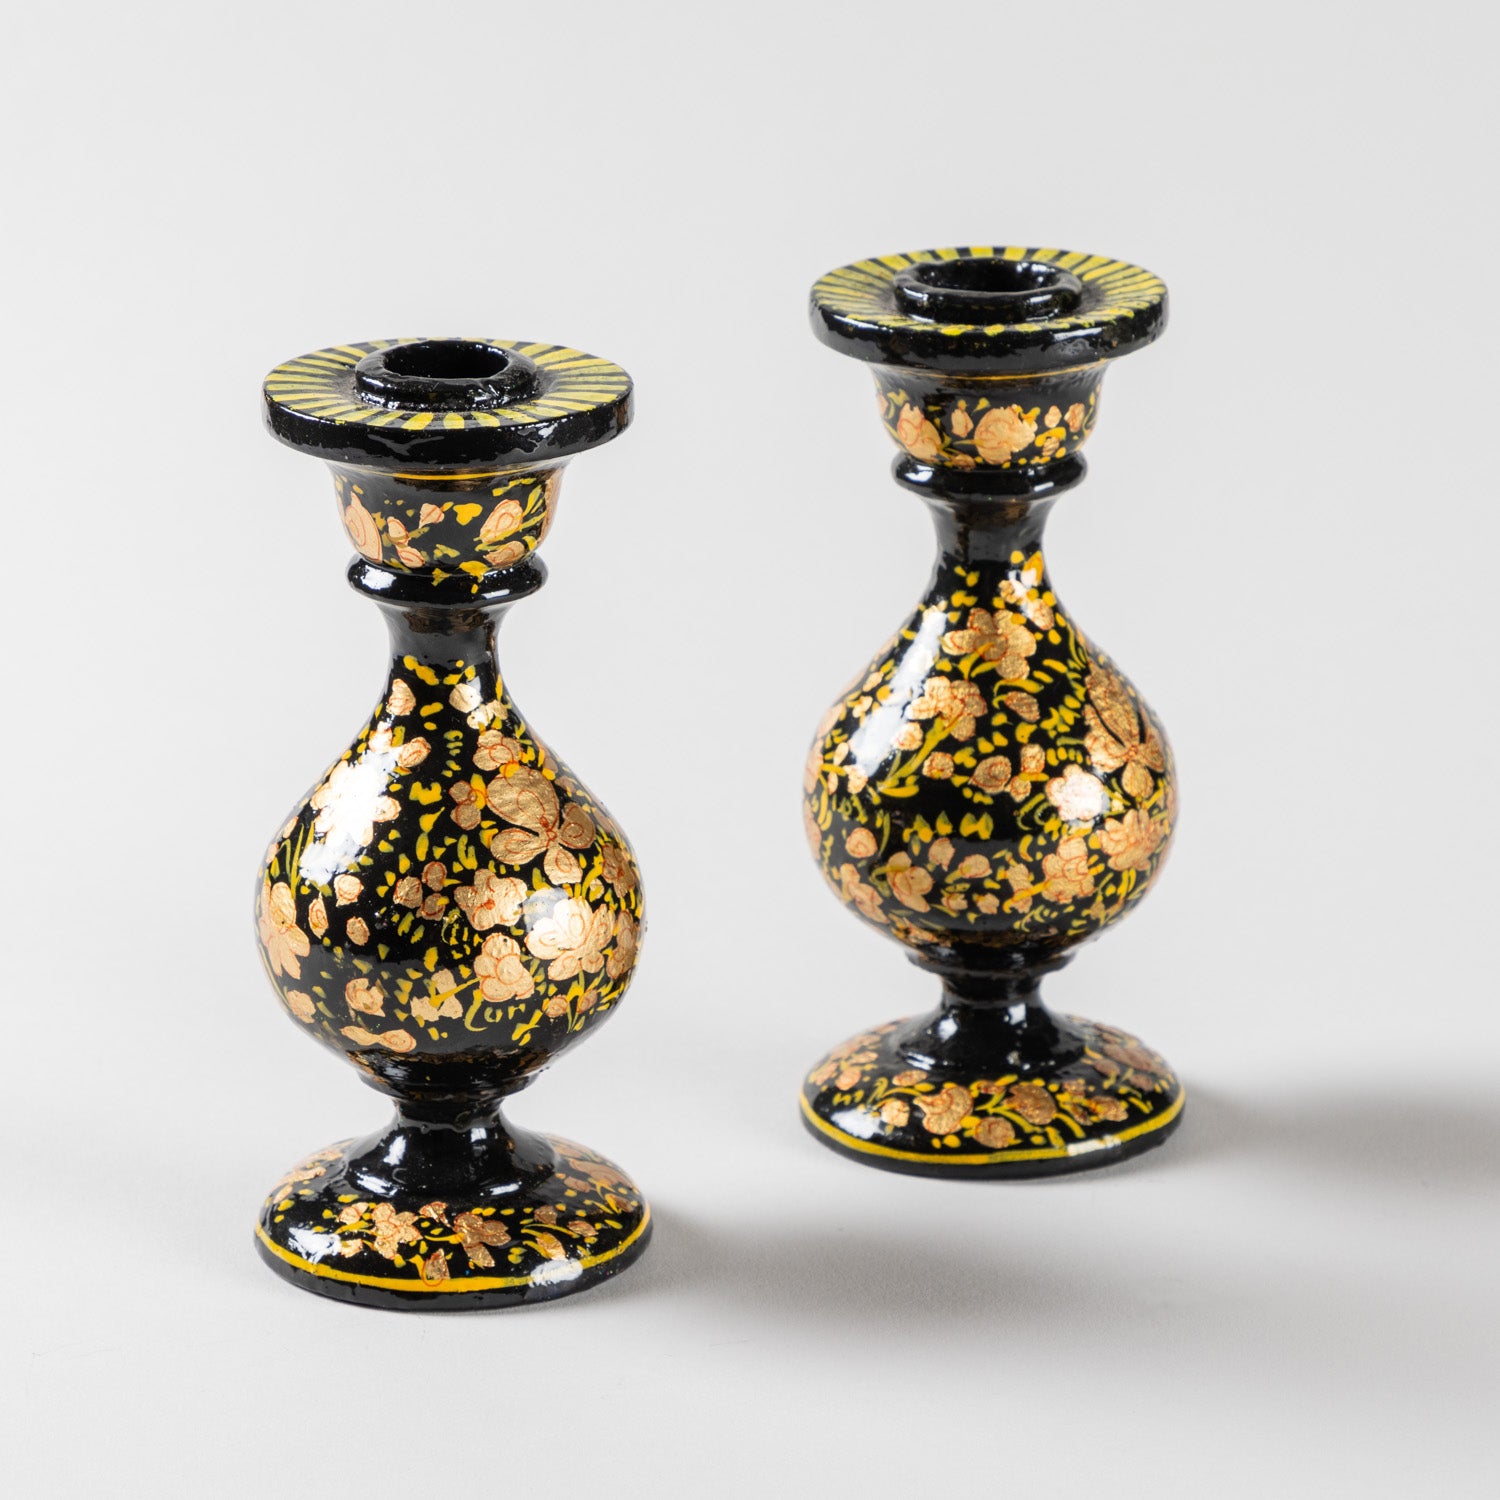 Hand Painted Papier Mache Candle Stands Black, Yellow, Gold - 5.5 x 2.3